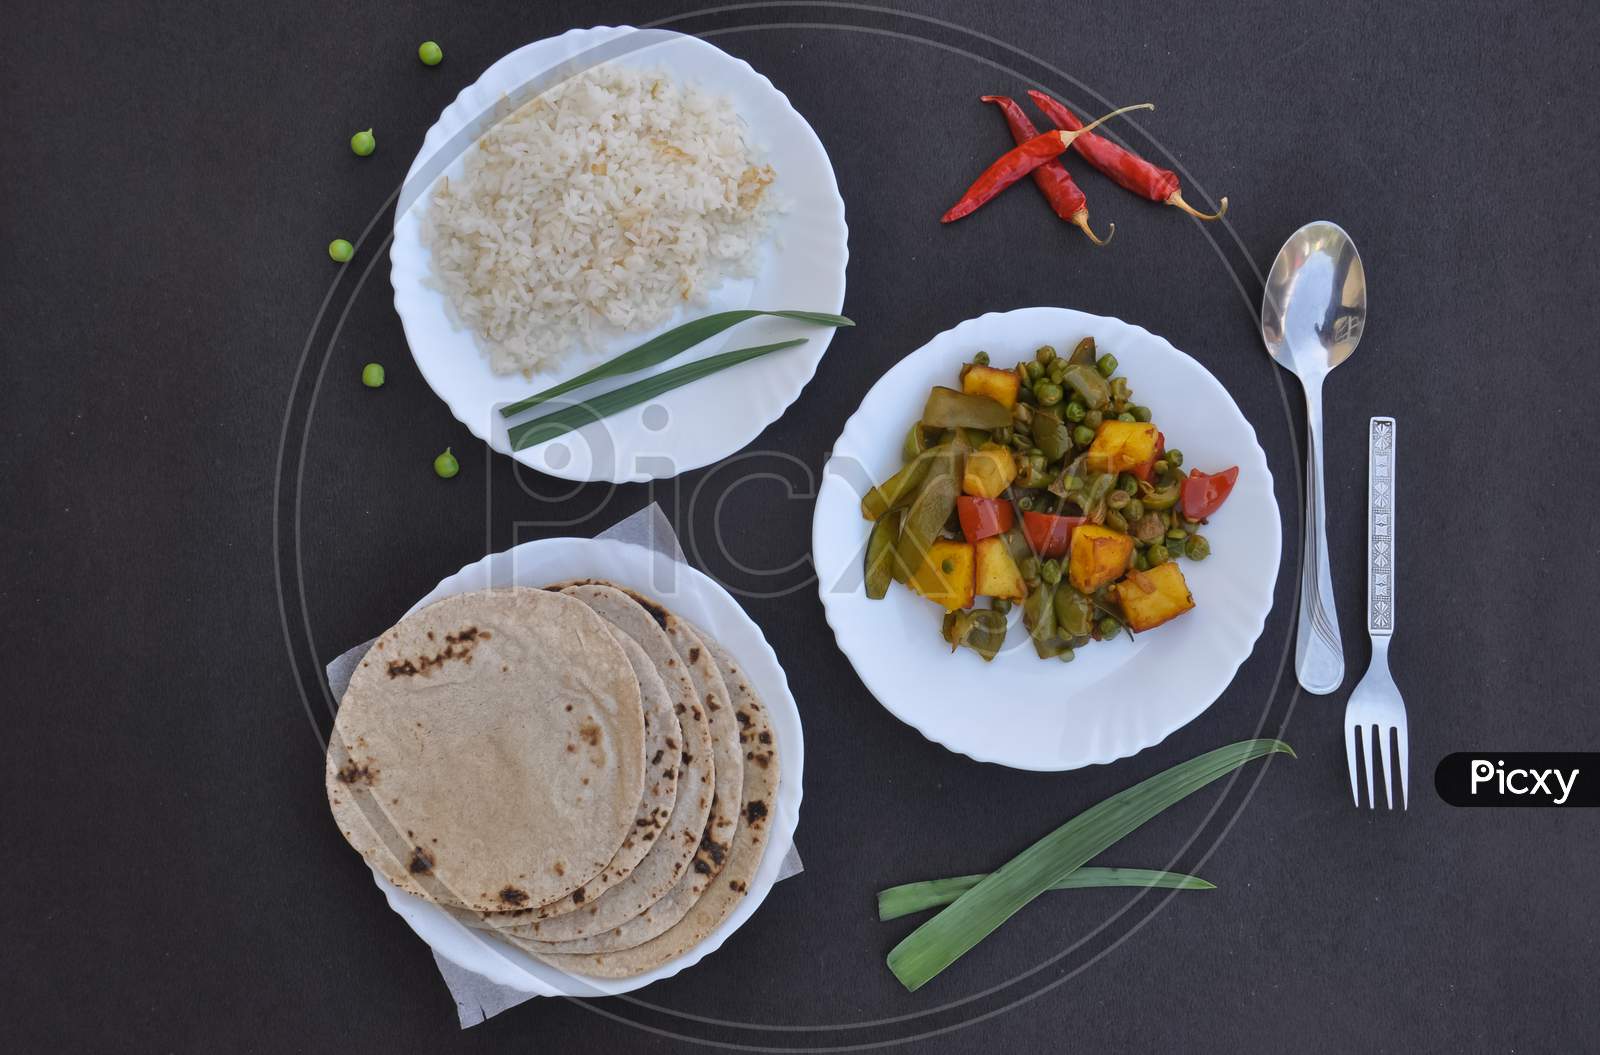 Top view of matar paneer mix veg, rice and chapati (Indian bread) on white plate over black background with copy space